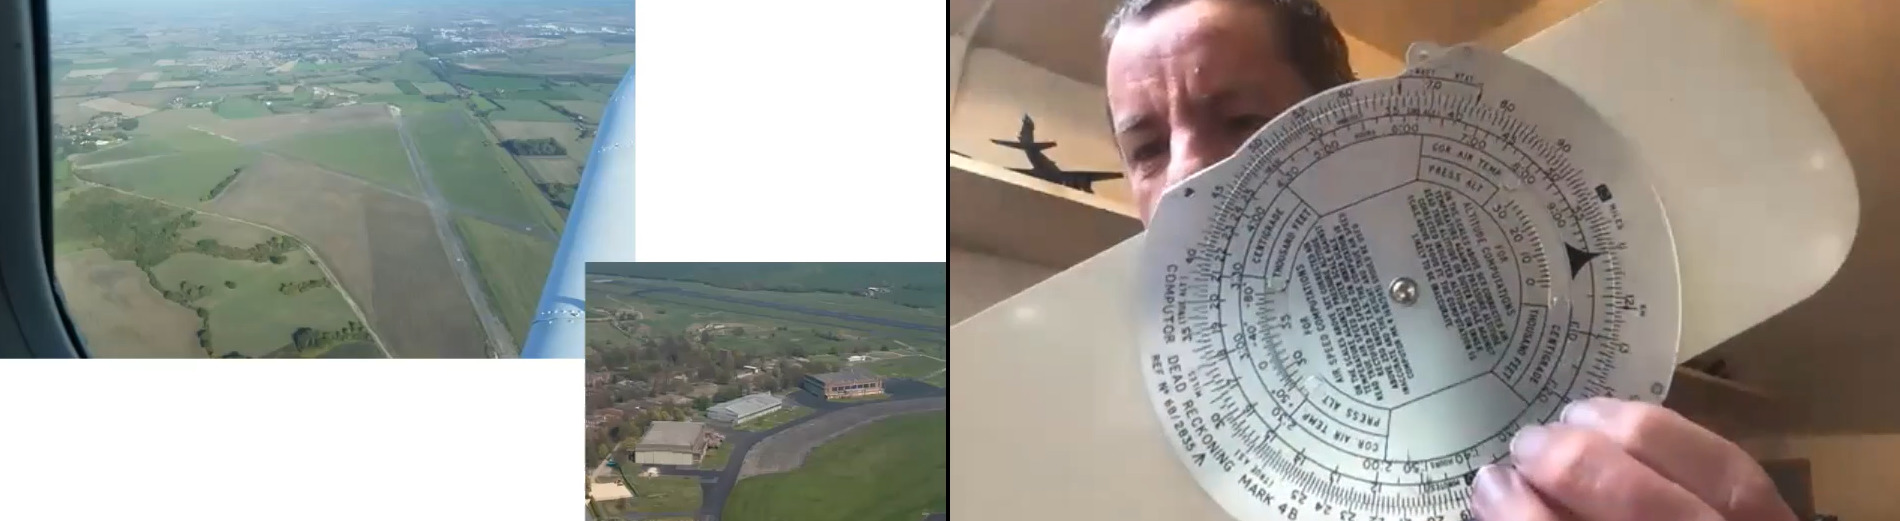 Volunteer John shows the camera an analogue computer - a silver disc with calibrations and numbers showing around the circle. The left-hand side of the image shows photos taken from a plane window over green fields and houses.